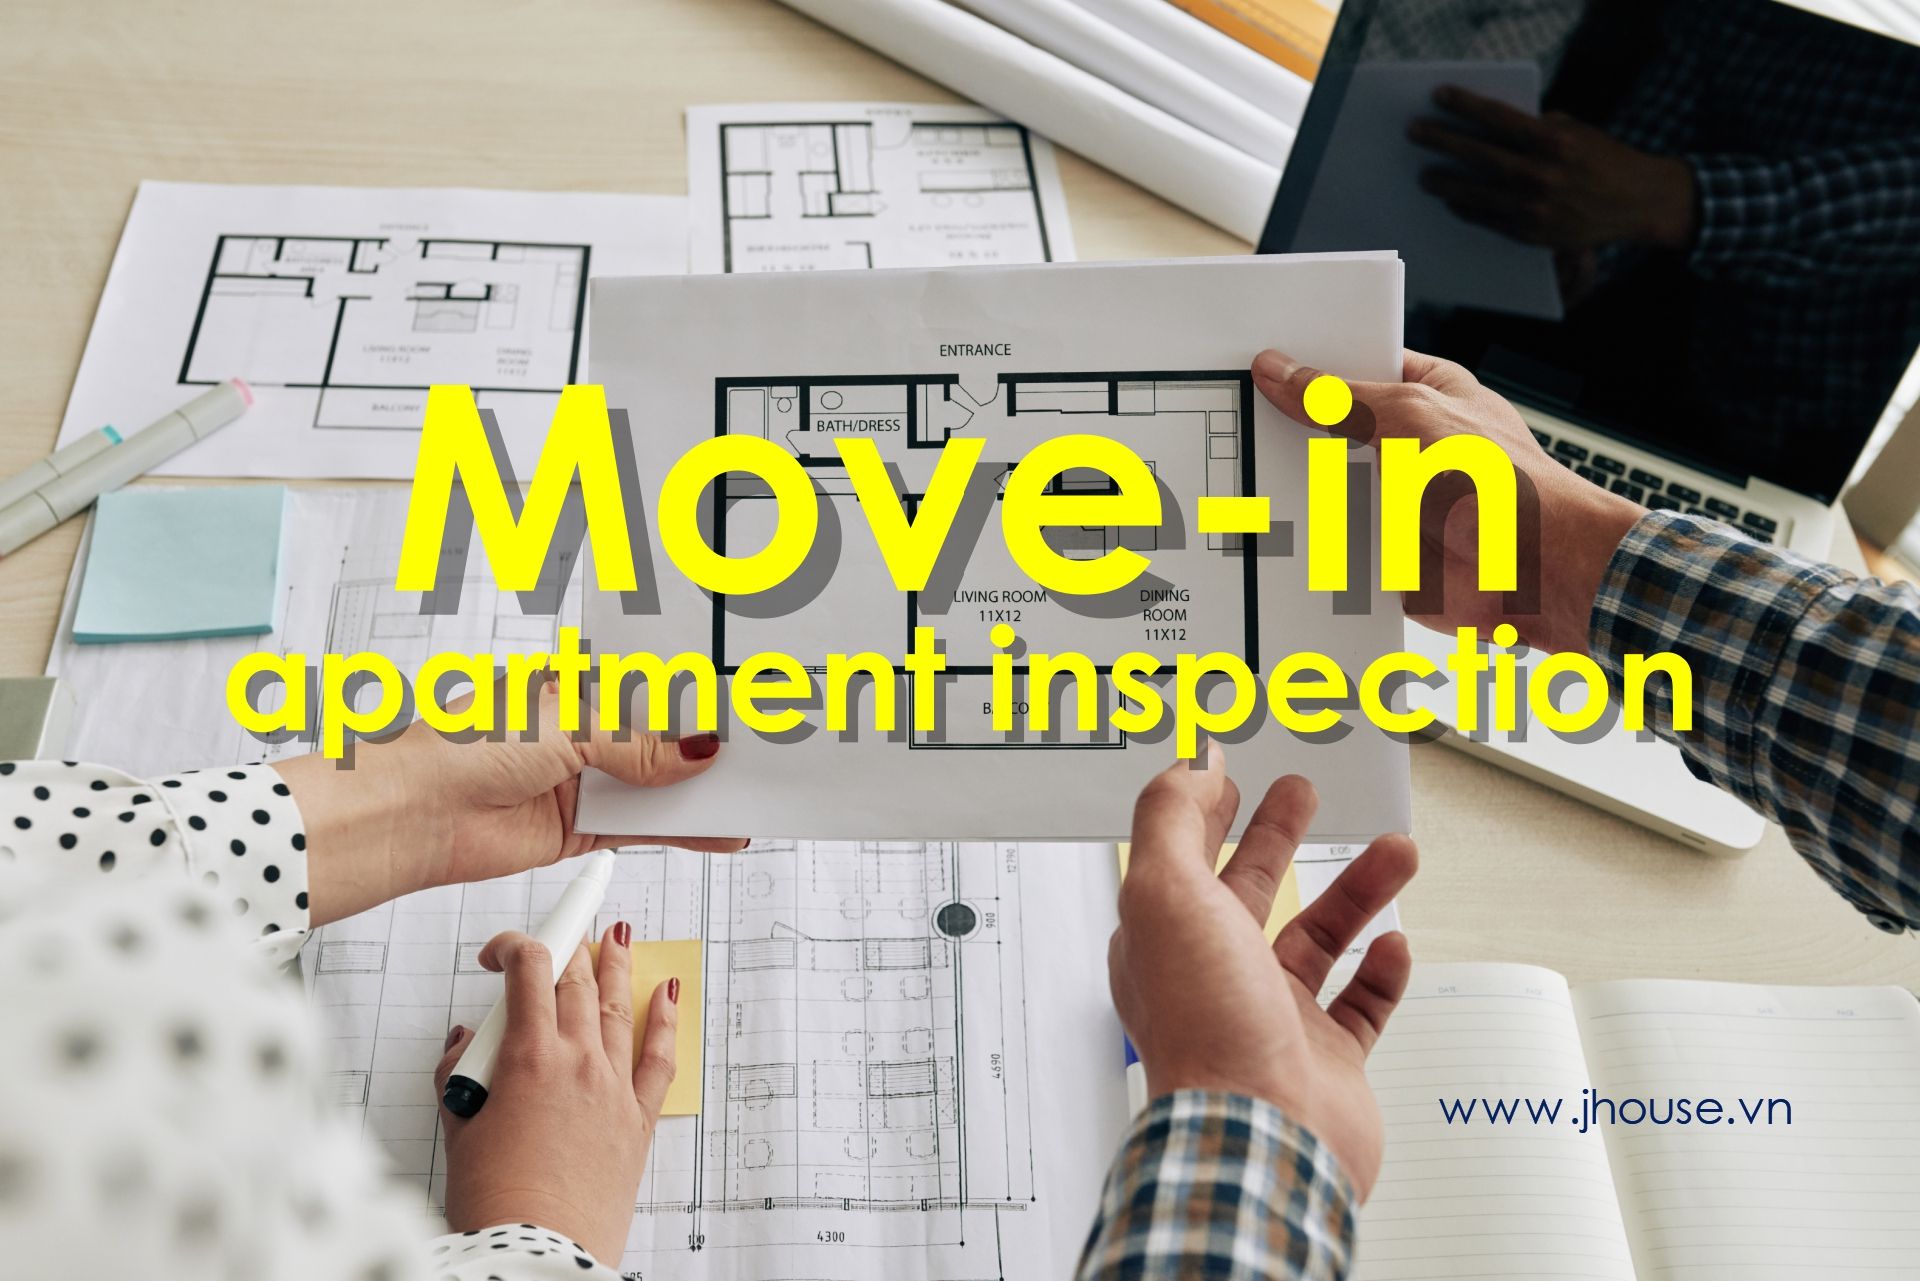 Move in apartment inspection